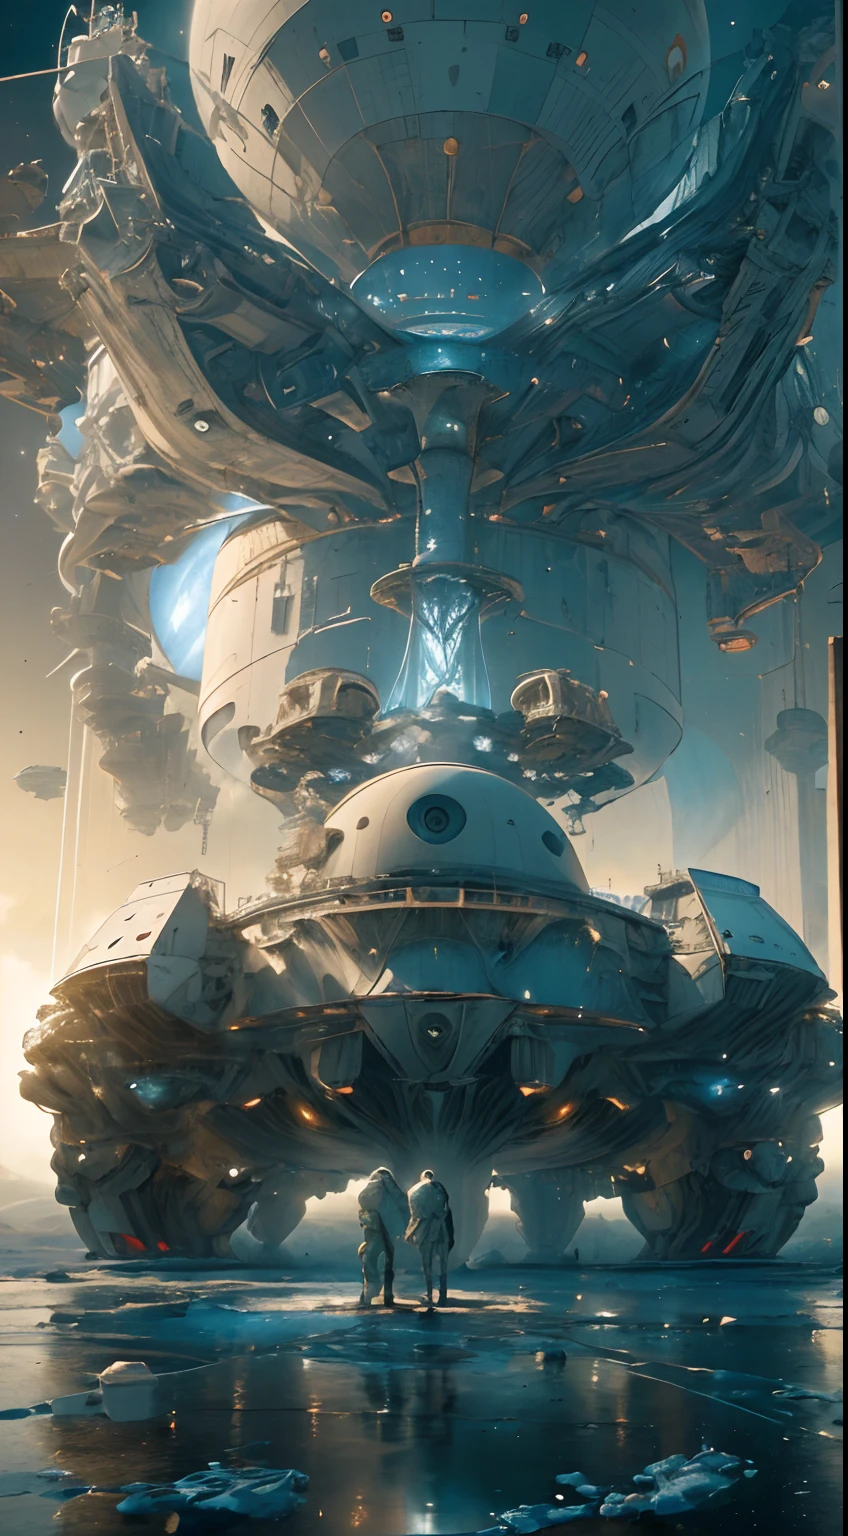 The Car,A fascinating depiction of a space station floating in a vast universe, Teardrop-shaped battleship Water drops destroy warships,(Stunning cosmic background), (Detailed spacecraft design), (Realistic rendering), (Impressive scale and proportions), (Futuristic architecture), (Focus on scientific accuracy), (Intricate mechanical details), (Immersive lighting effects), (An awesome sense of expanse), trending on artstationh, (trending on CGSociety), (Showcase the wonders of space exploration), (Evoke a sense of technological progress), (Highly detailed spatial environment), (Deep attention to texture and material), (Depicting astronauts or extraterrestrial life), (Conveys a feeling of serenity and awe), (Capture the beauty and mystery of the universe), (A clever depiction of depth and perspective),vortex,